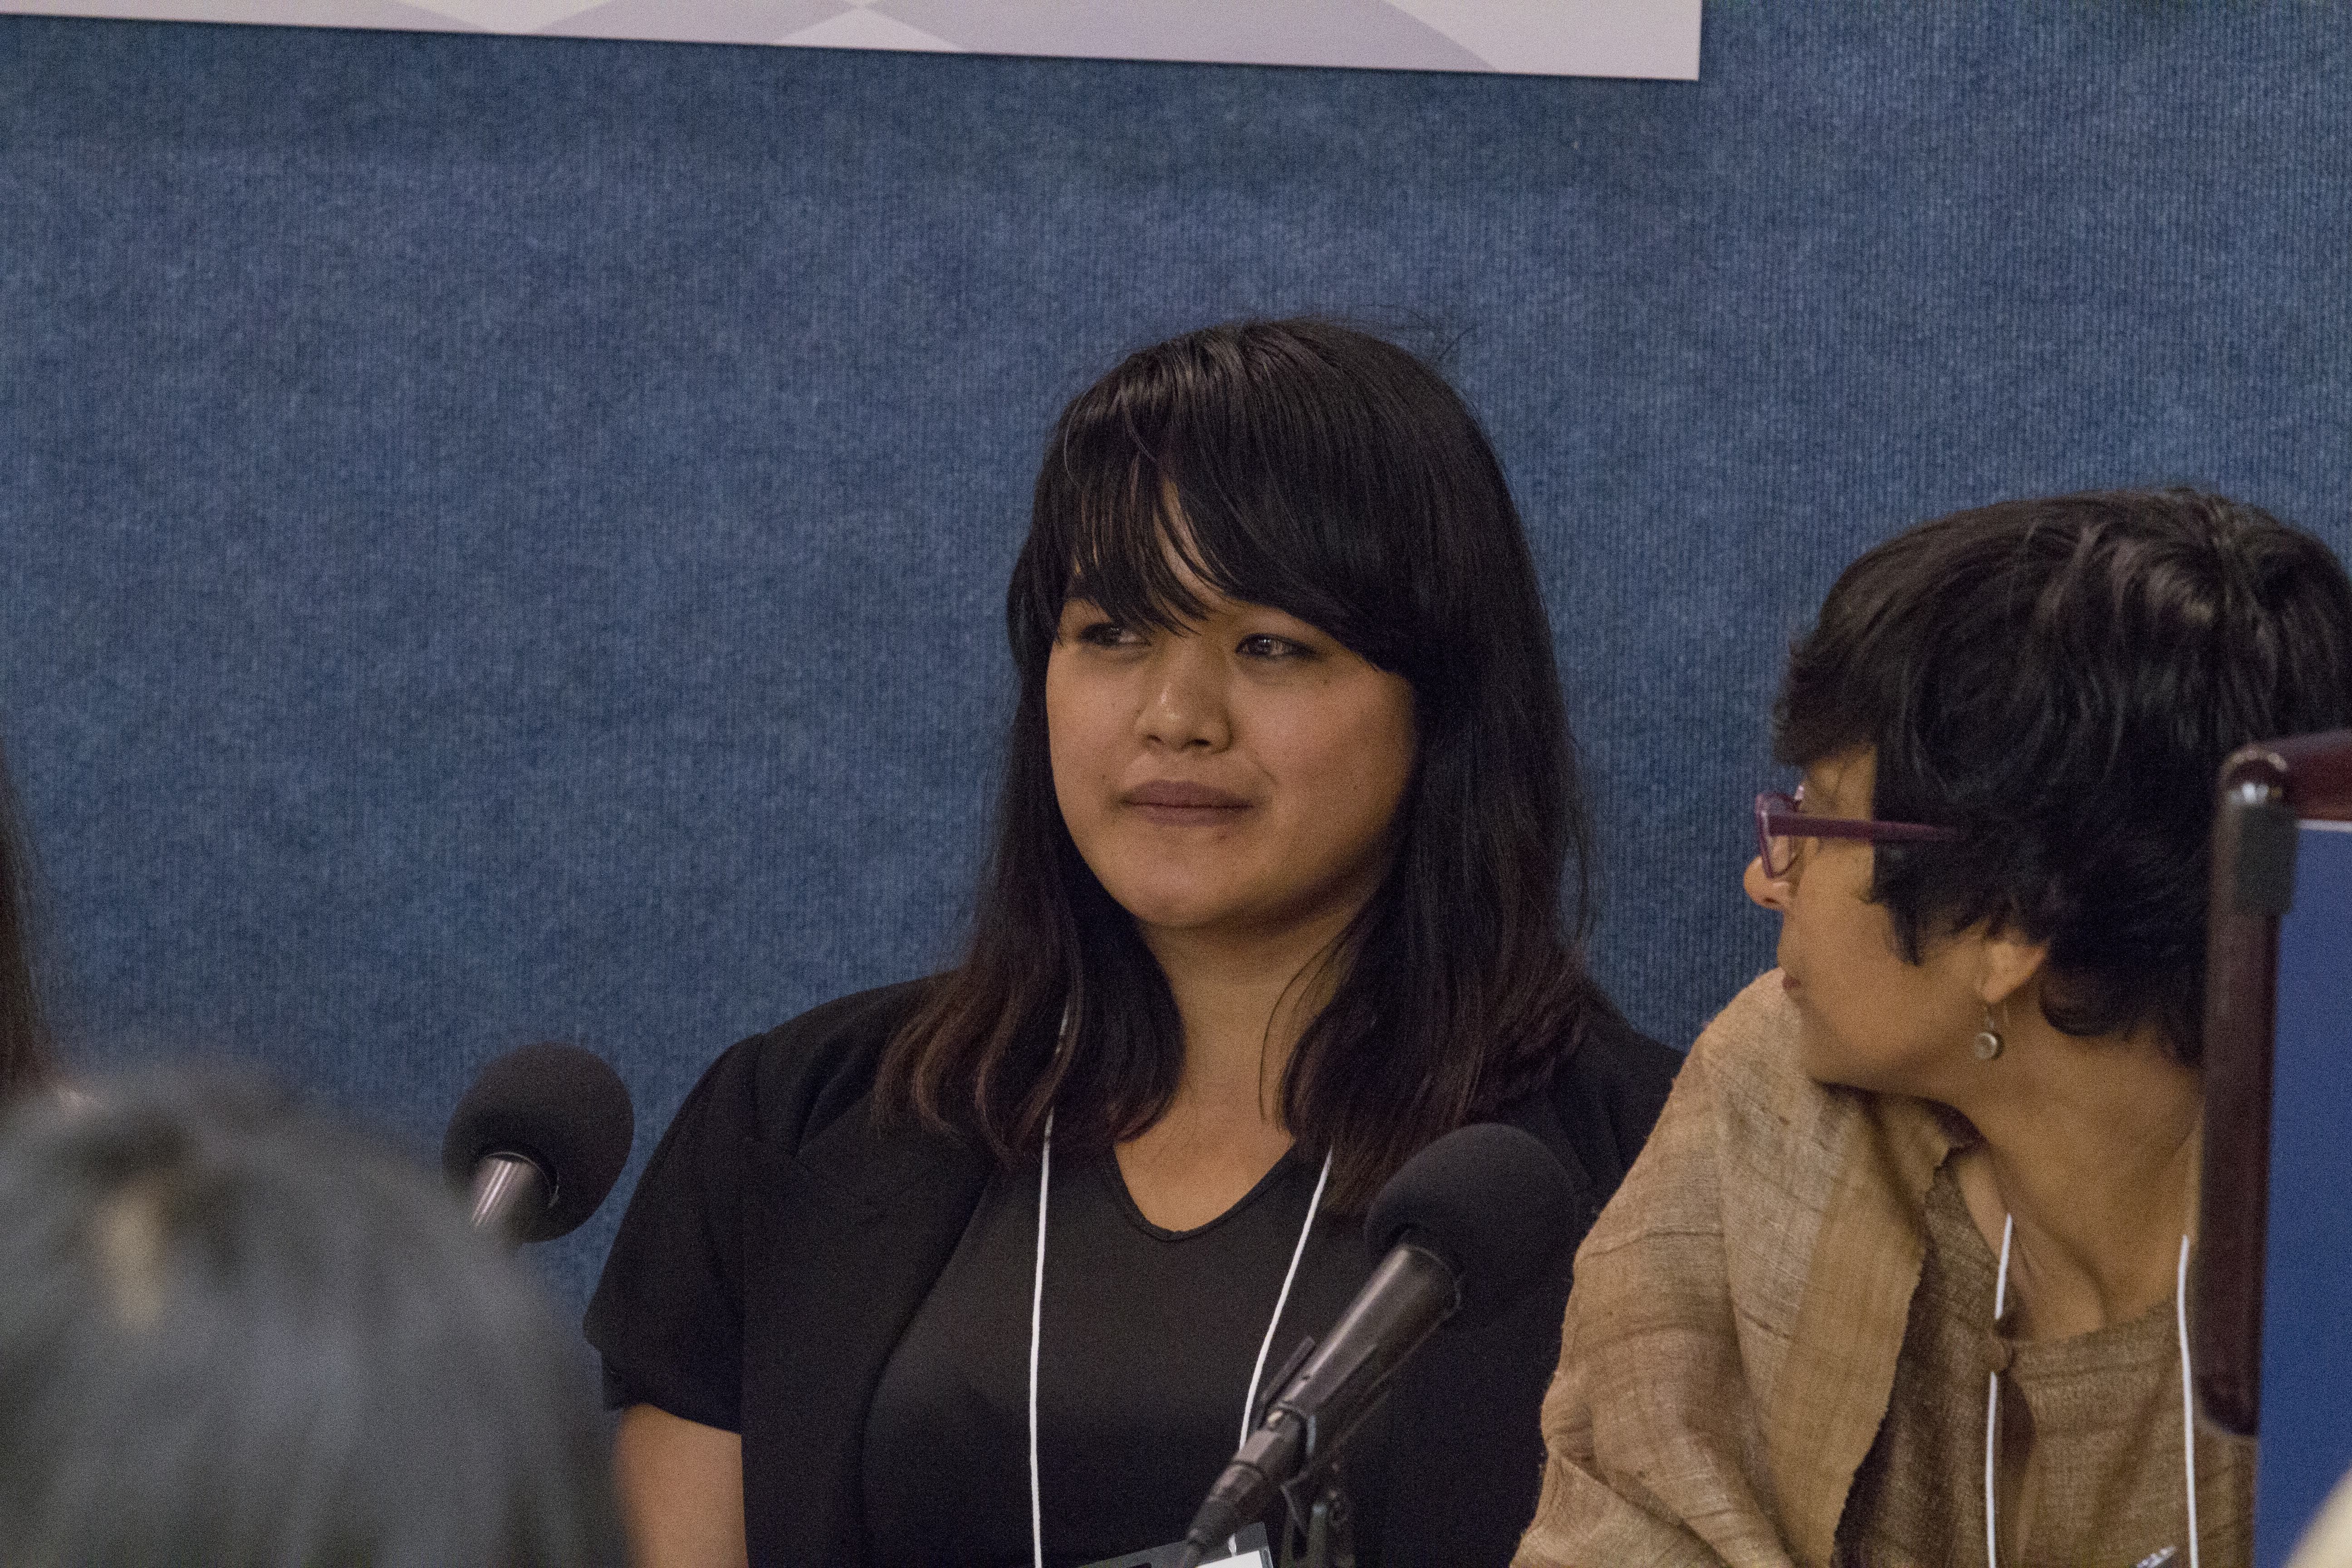 Grantee photographer Xyza Bacani speaks on Labor & Economics panel at Pulitzer Center Gender Lens Conference, moderated by Rhitu Chatterjee. Image by Jin Ding. United States, 2017.